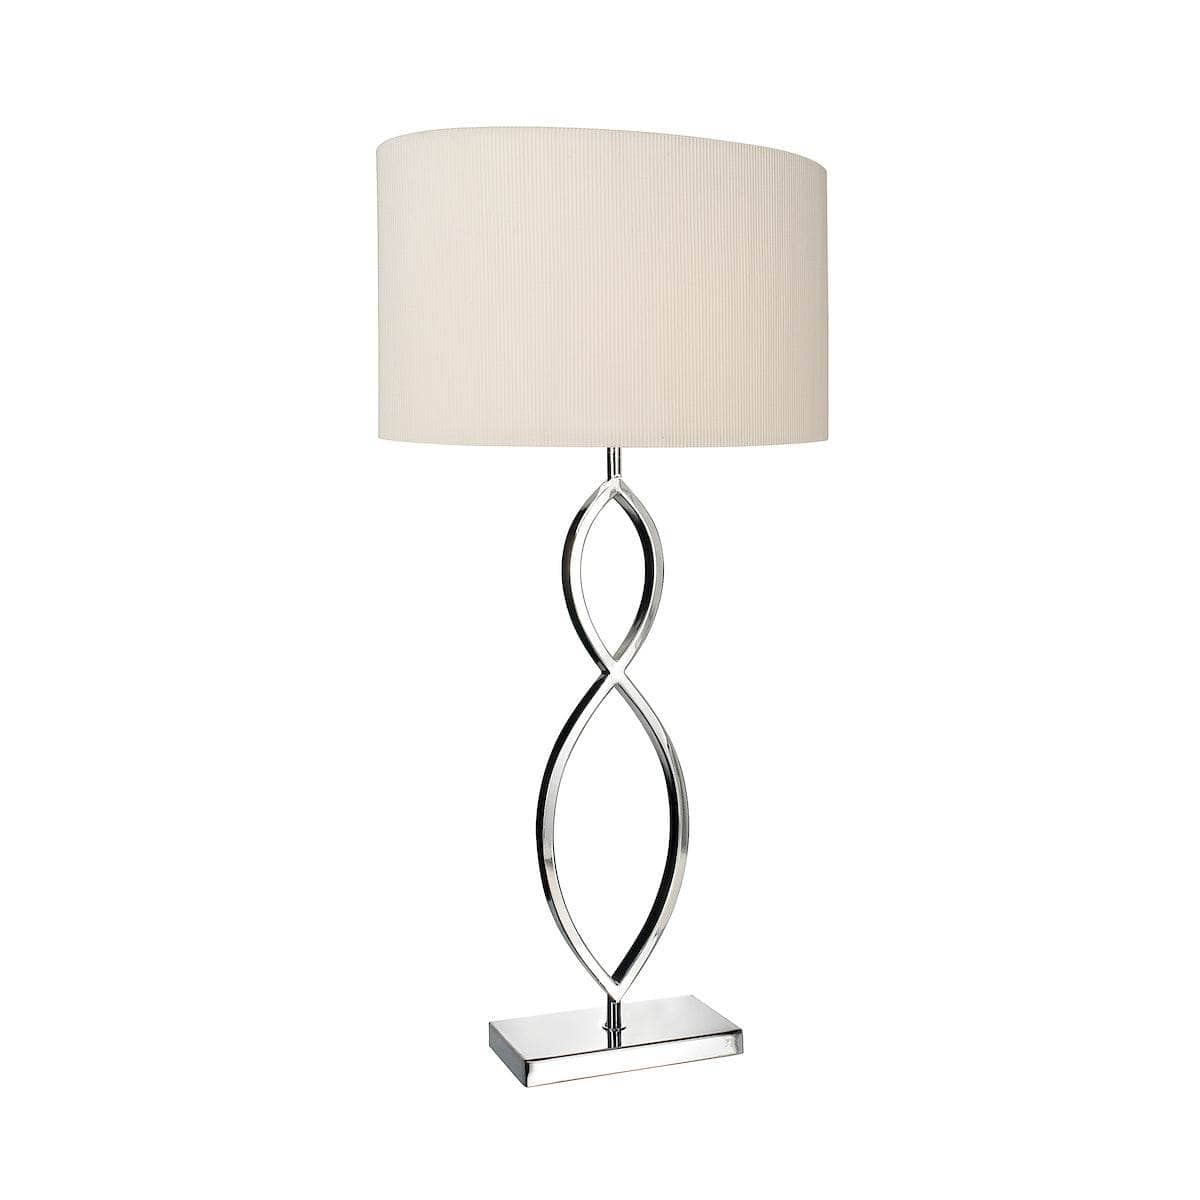 Lights  -  Osuna 2 Hoop Table Lamp Polished Ch Complete With Cream Shade  -  50079140